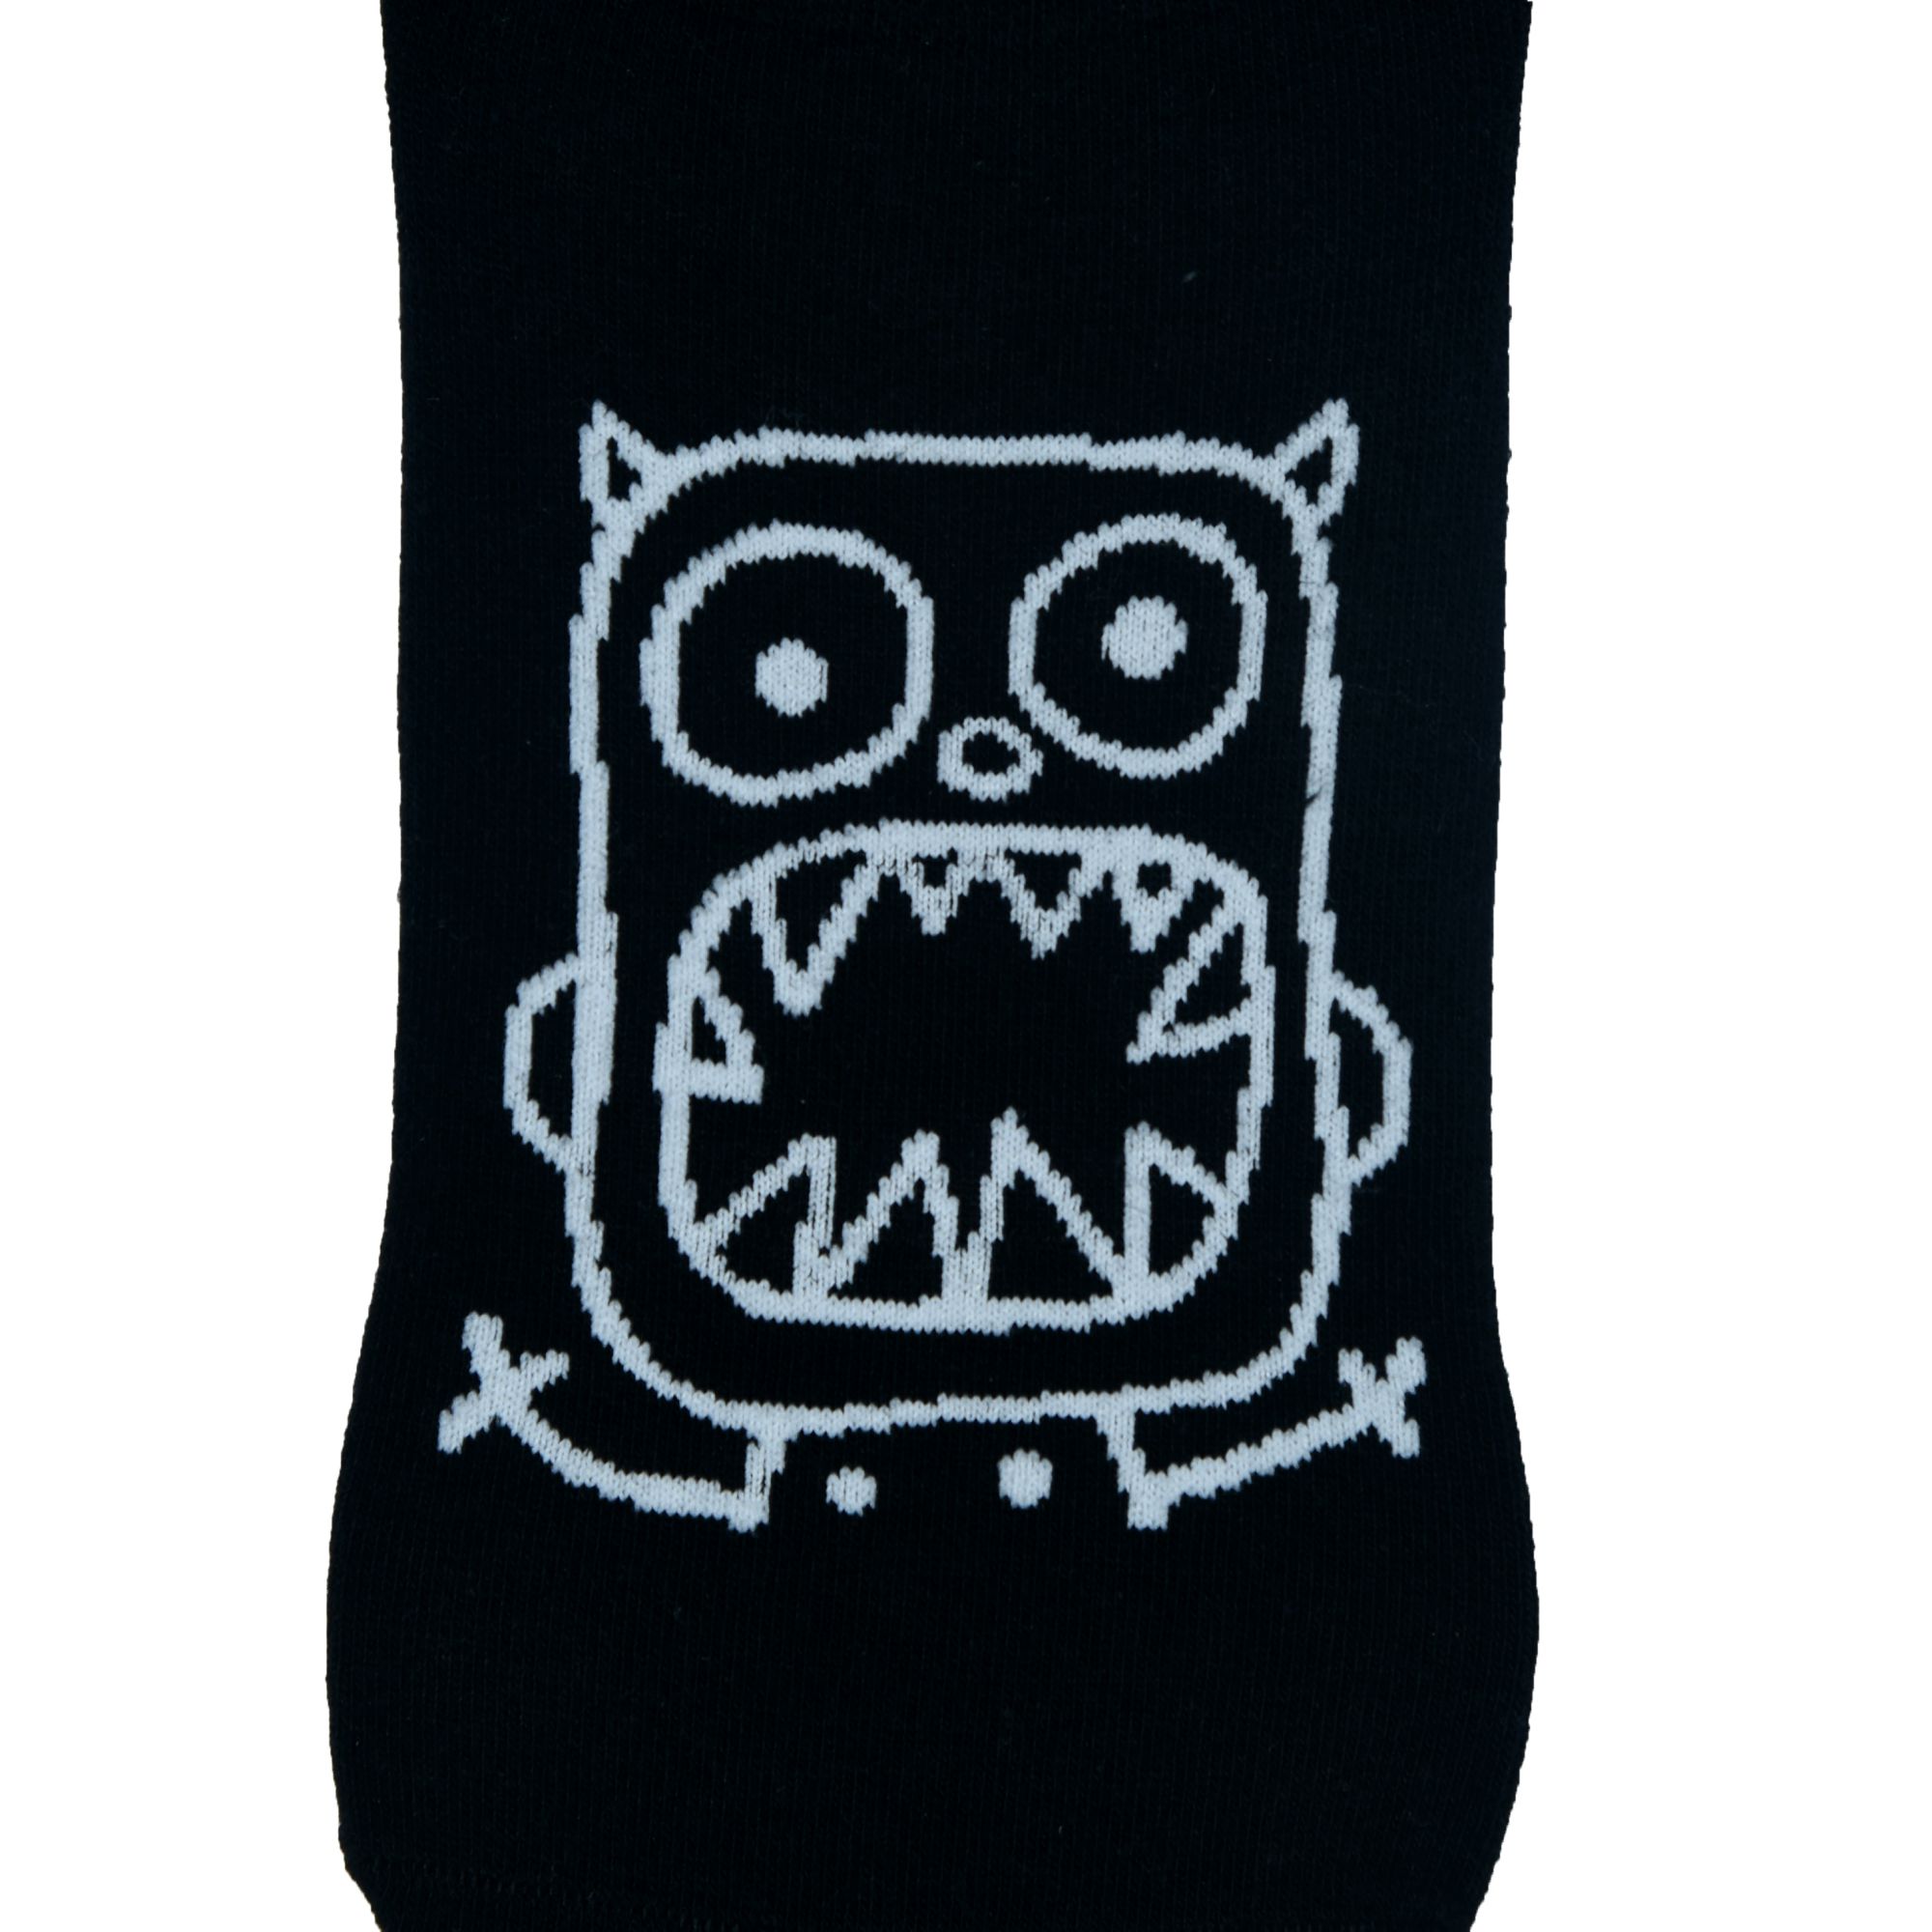 Monster Face Graphic Black Low Cut Ankle Socks